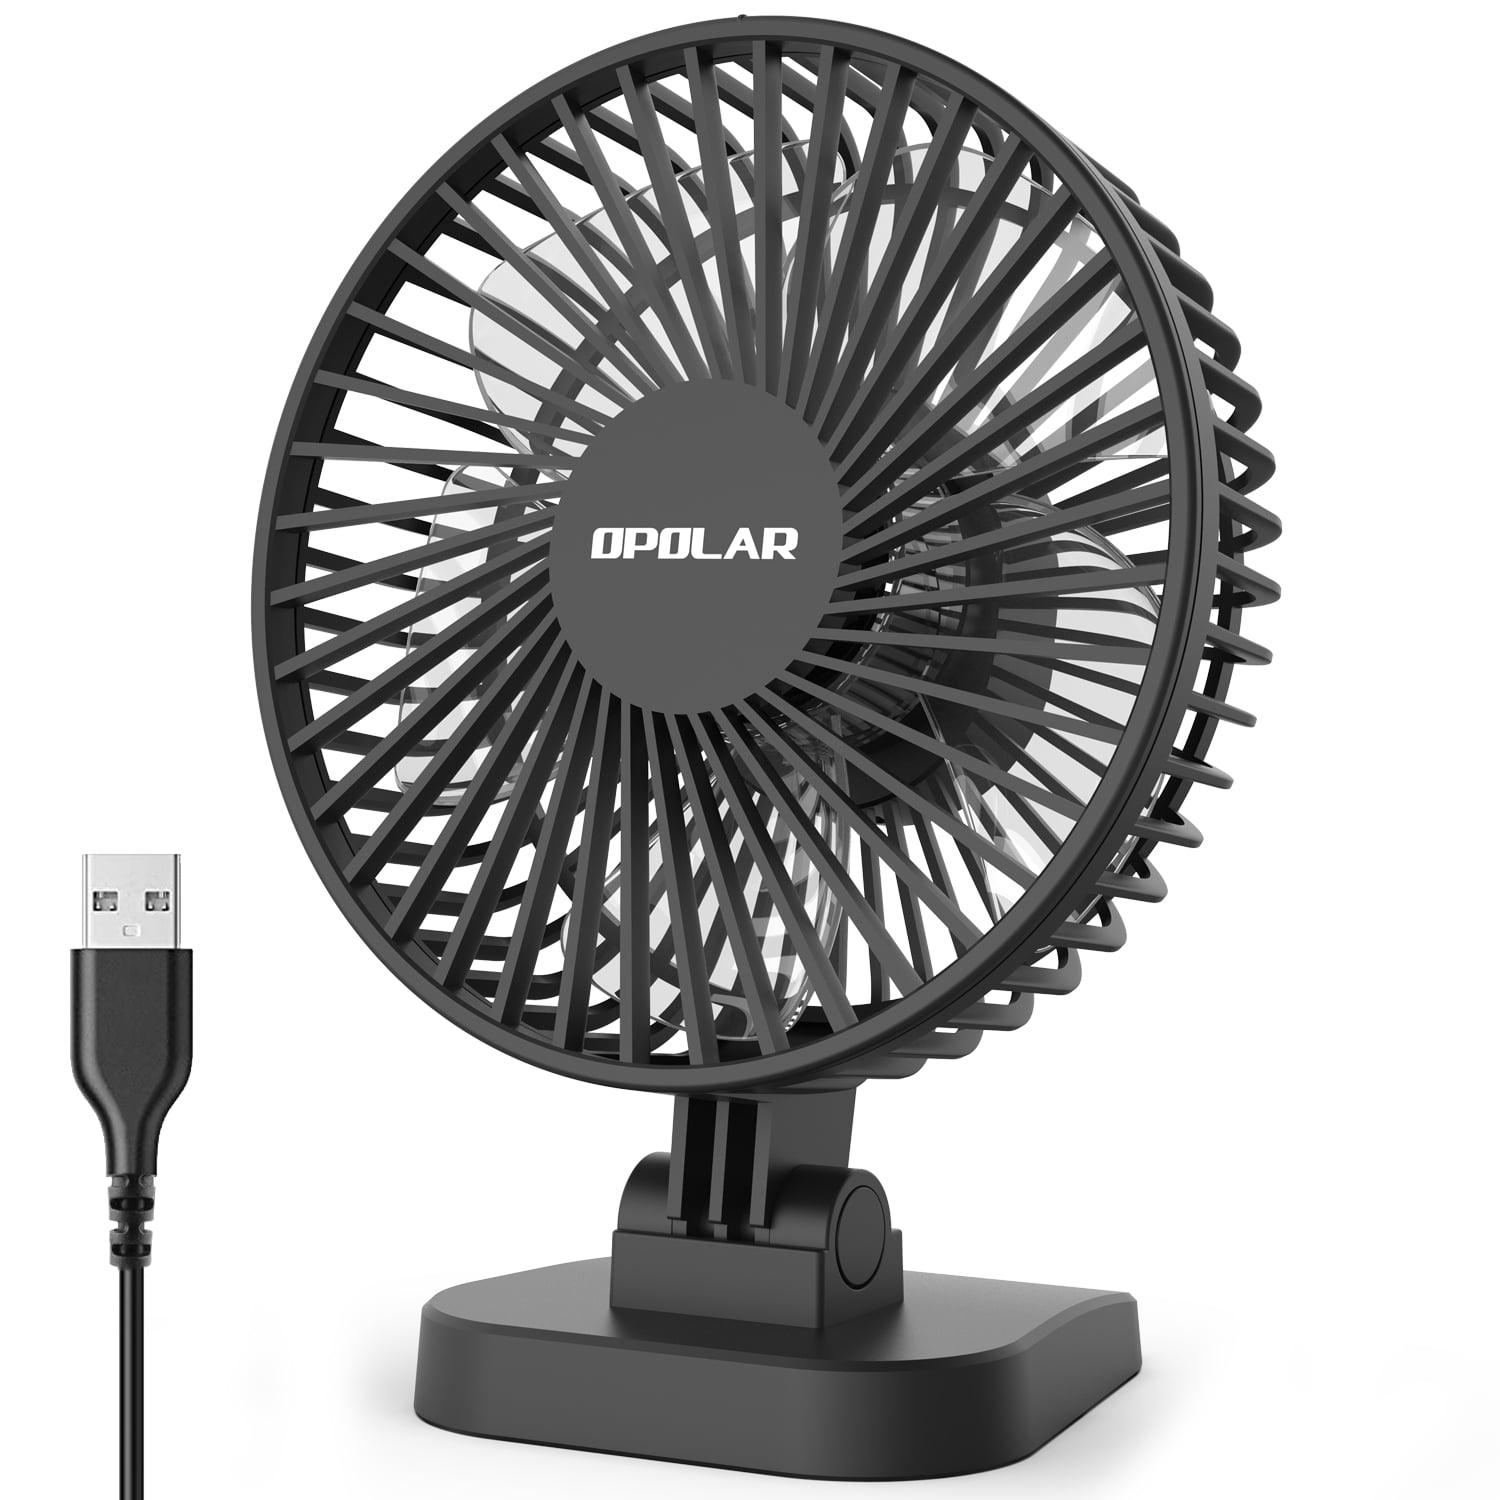 Portable Personal Fan for Desktop Office Table Strong Airflow but Whisper Quiet OPOLAR New Mini USB Powered Desk Fan with 3 Speeds Small but Mighty-White 40° Adjustment 